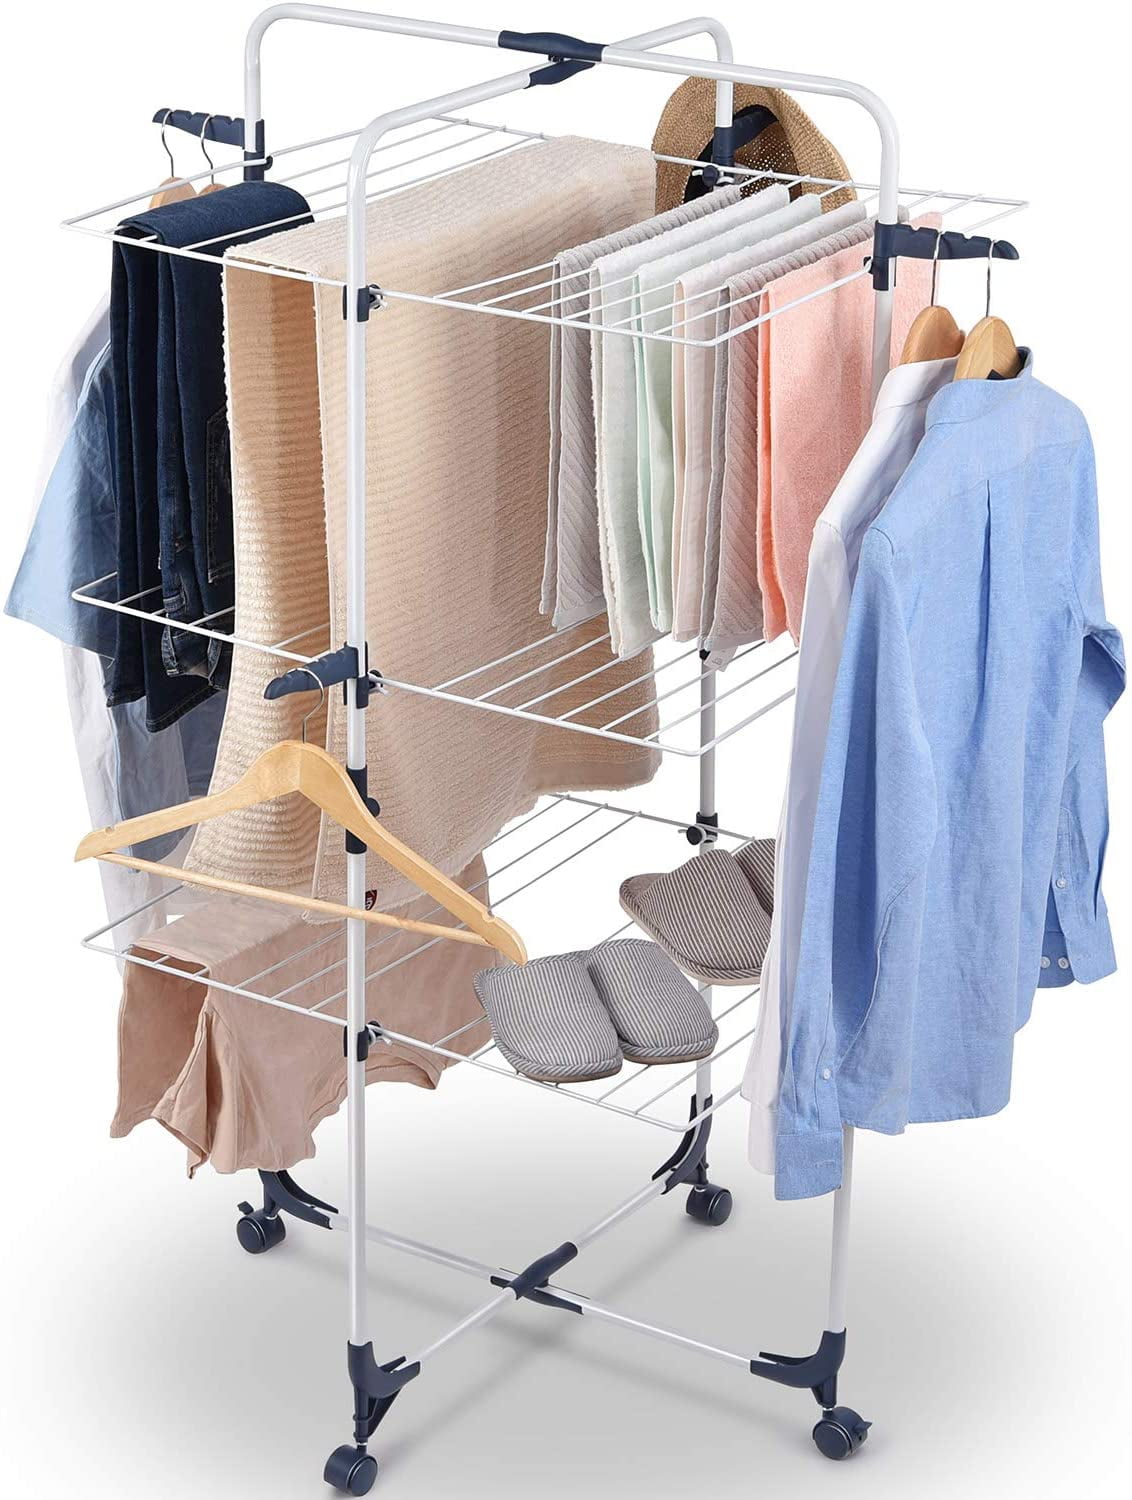 Clothes Drying Rack Laundry Stand Folding Hanger Indoor Dryer Storage Portable A 